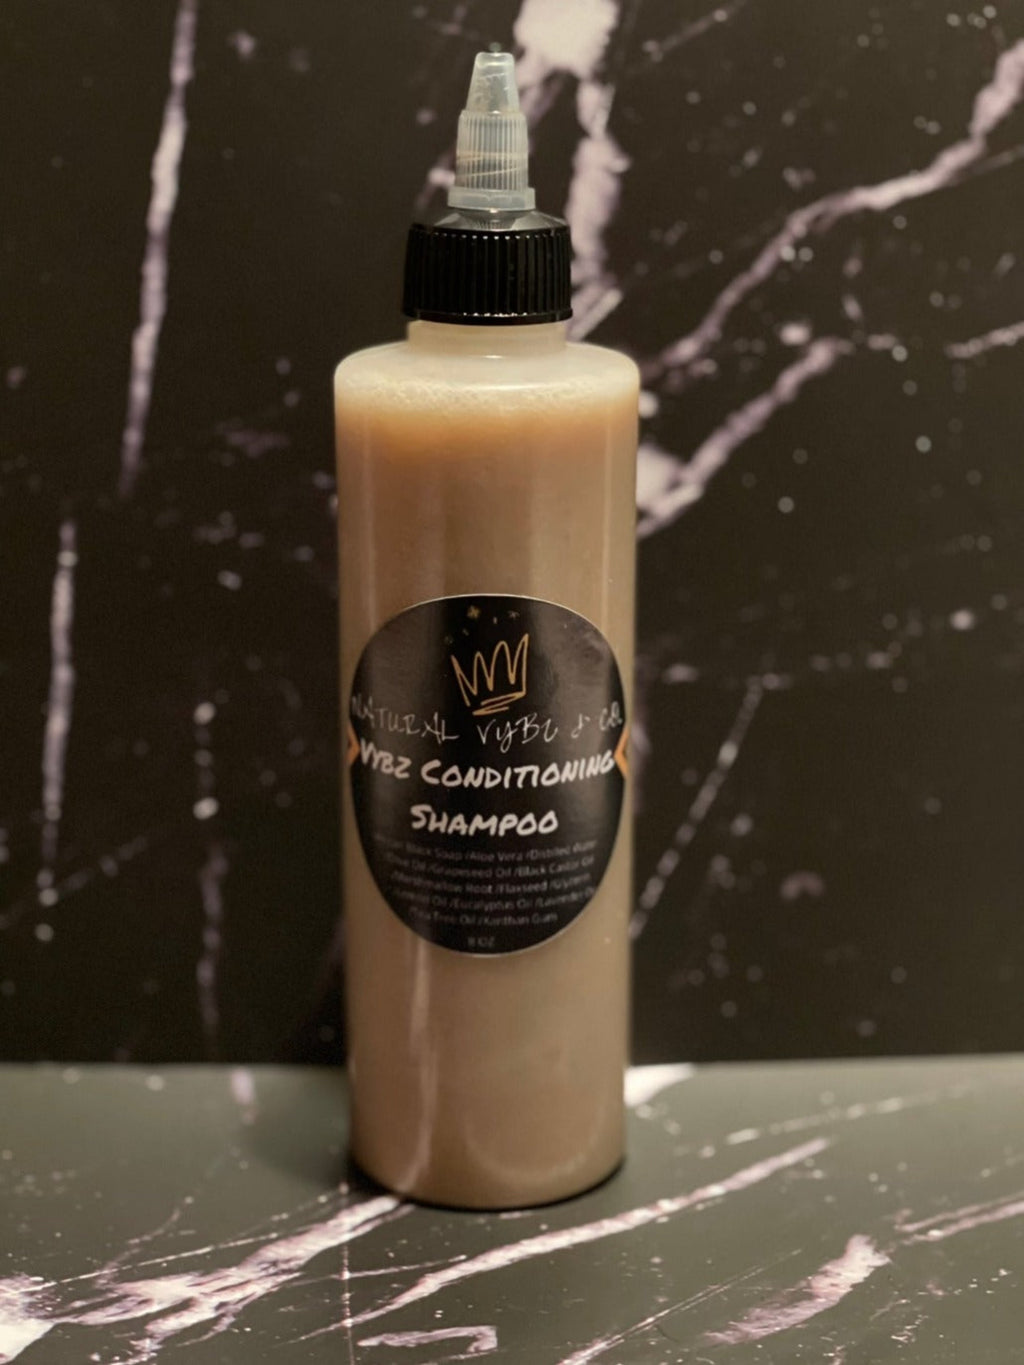 Conditioning shampoo made naturally with african black soap